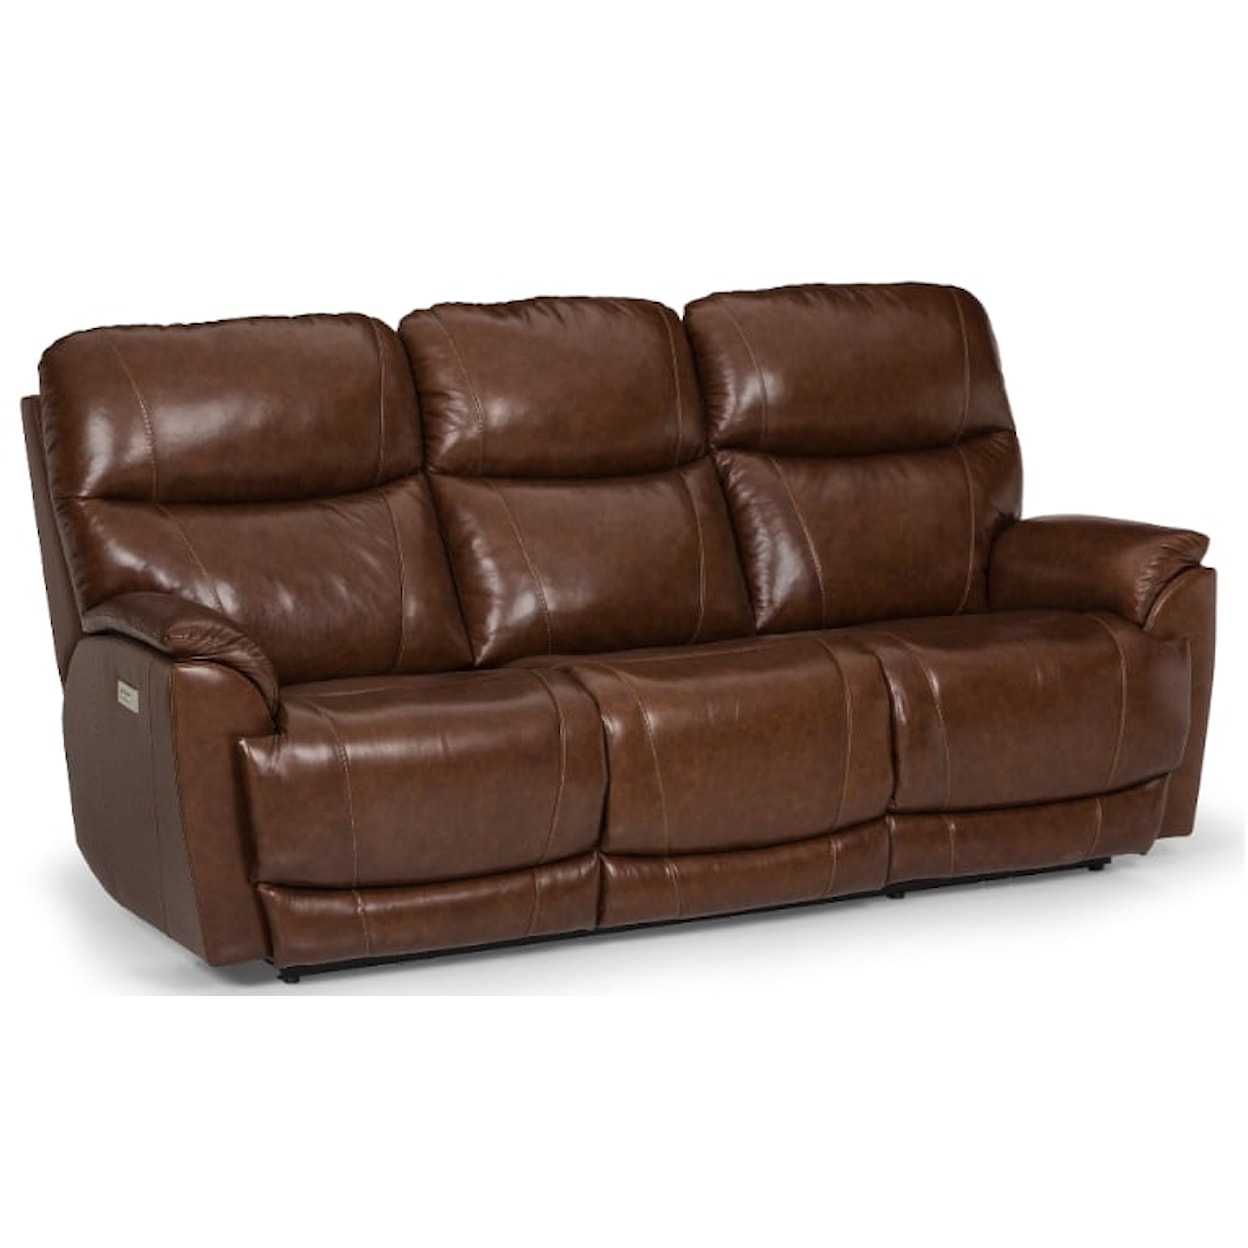 Stanton 729 Power Reclining Sofa with Power Headrests